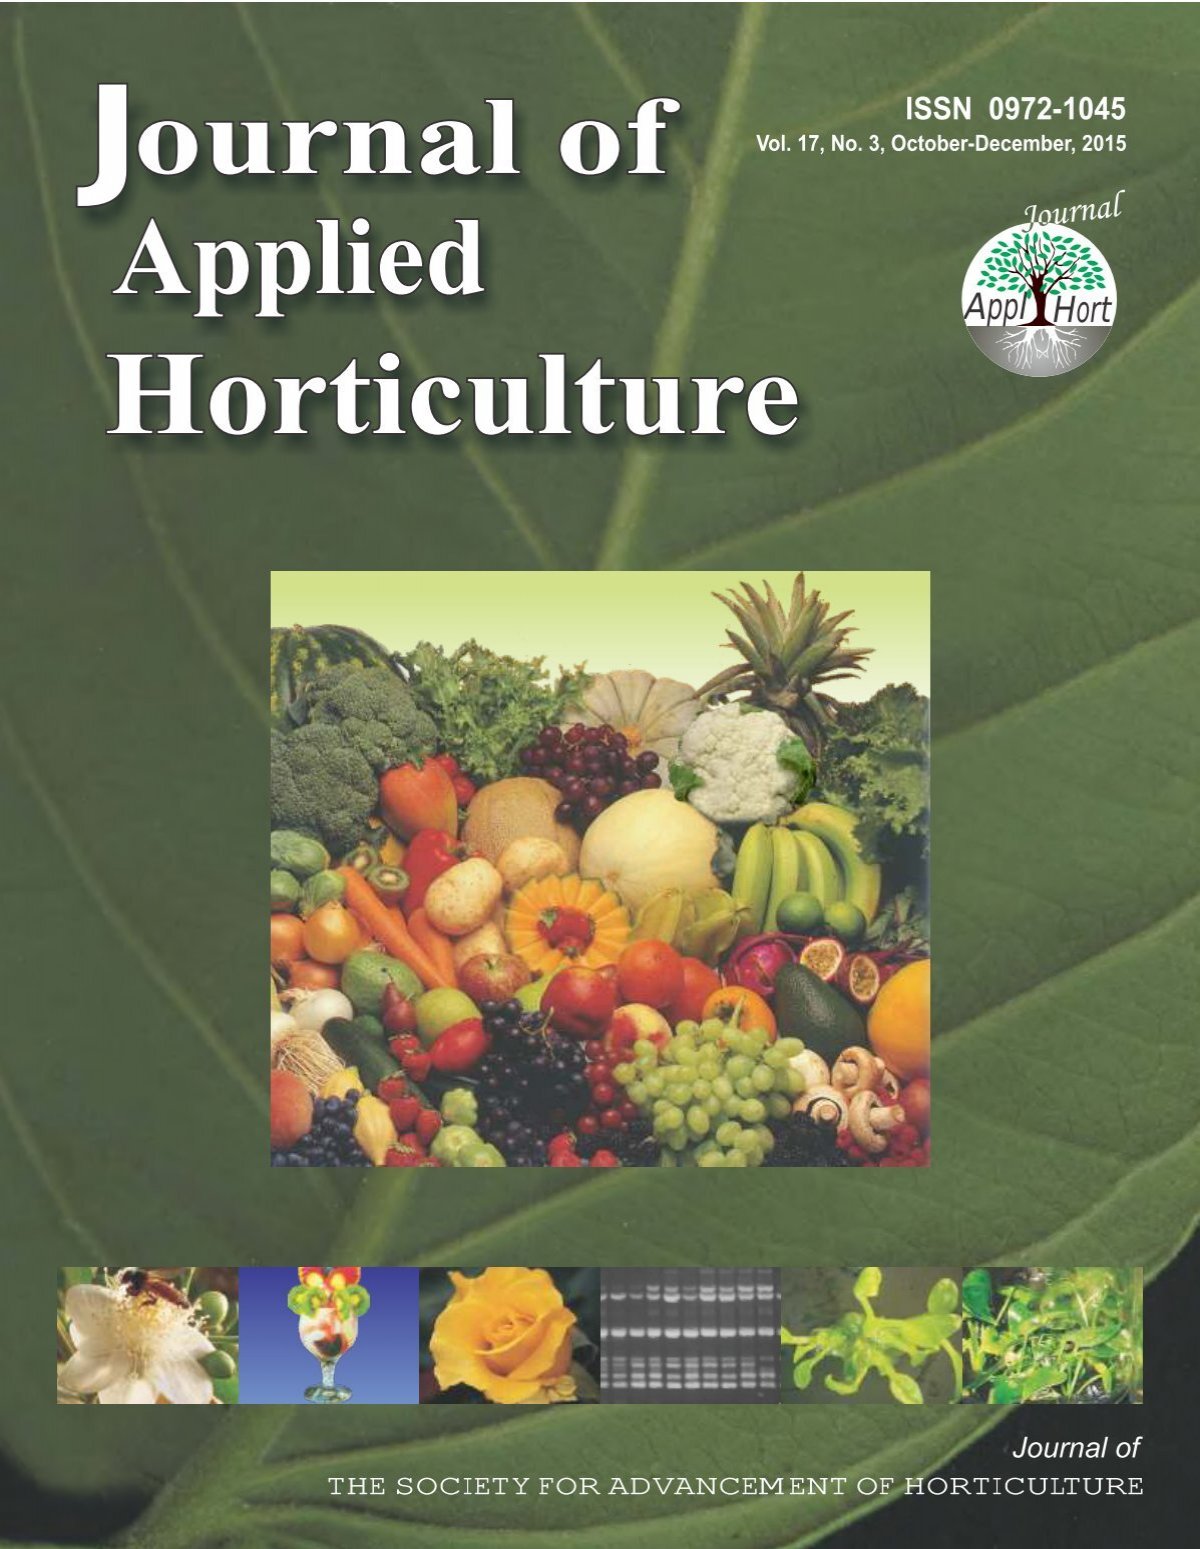 Journal of Applied Horticulture 17(3) indexing.pdf